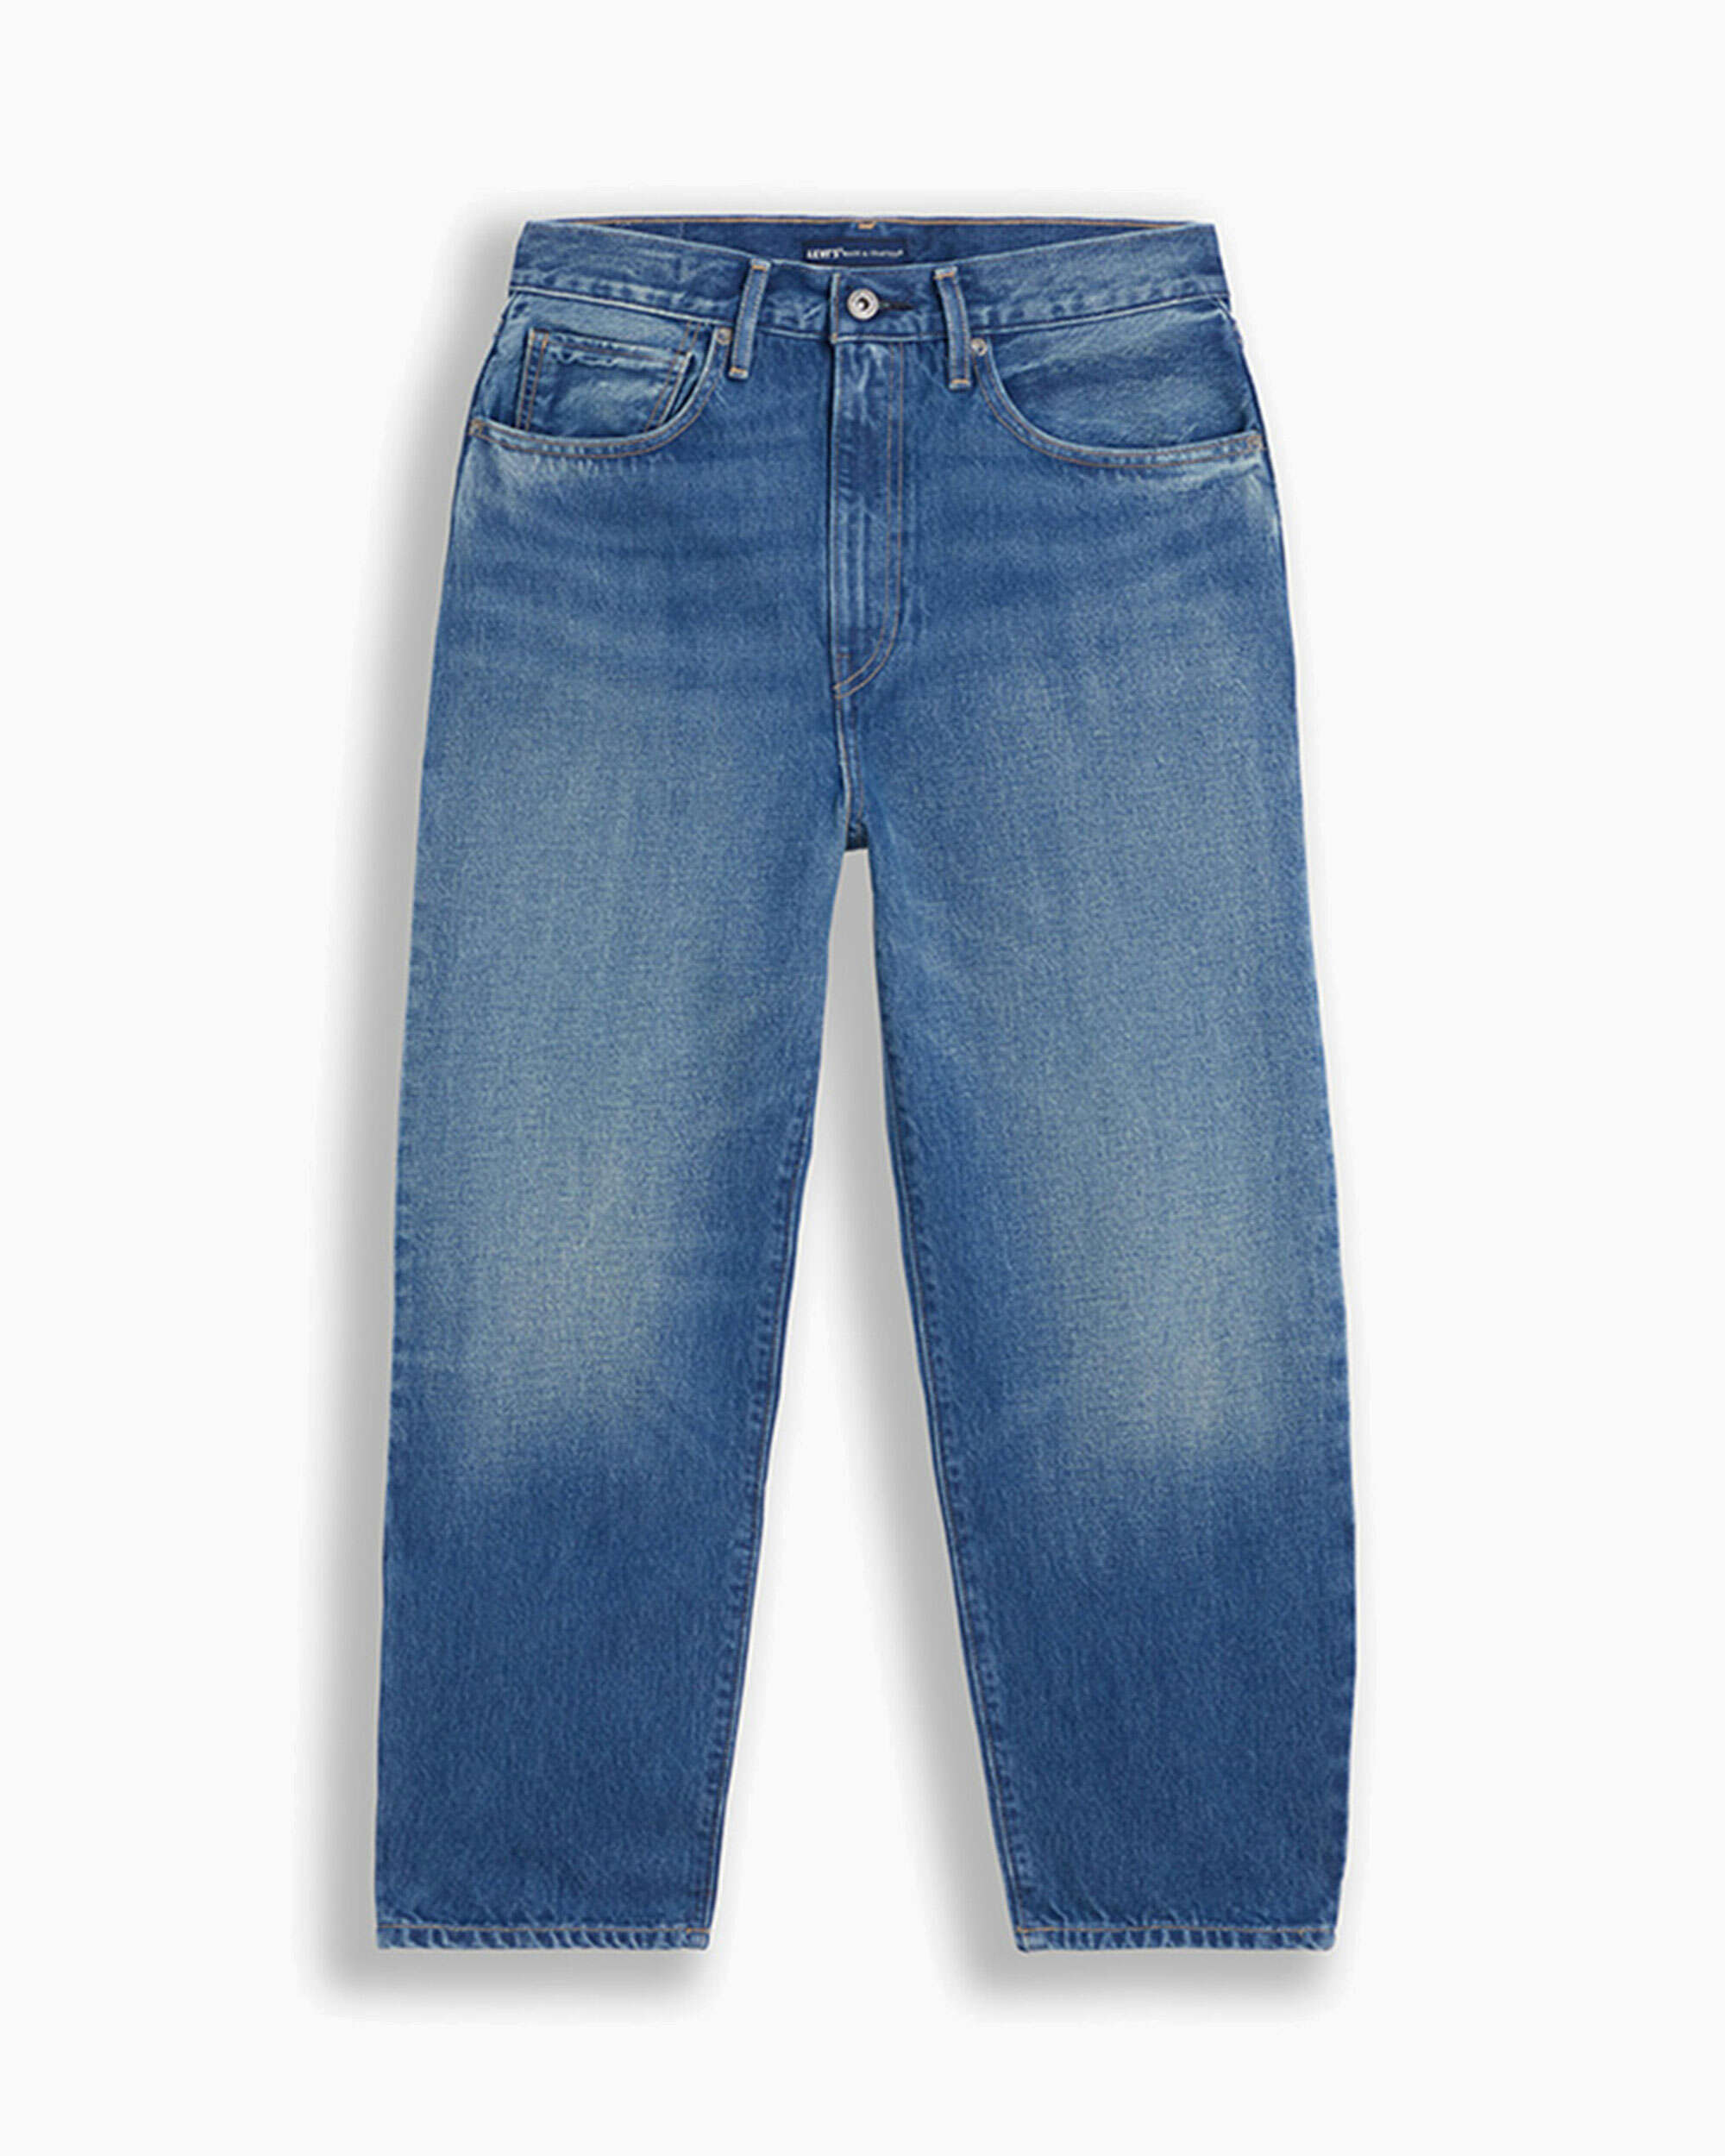 Levis Made and Crafted Women's Barrel Pants Blue   Buy